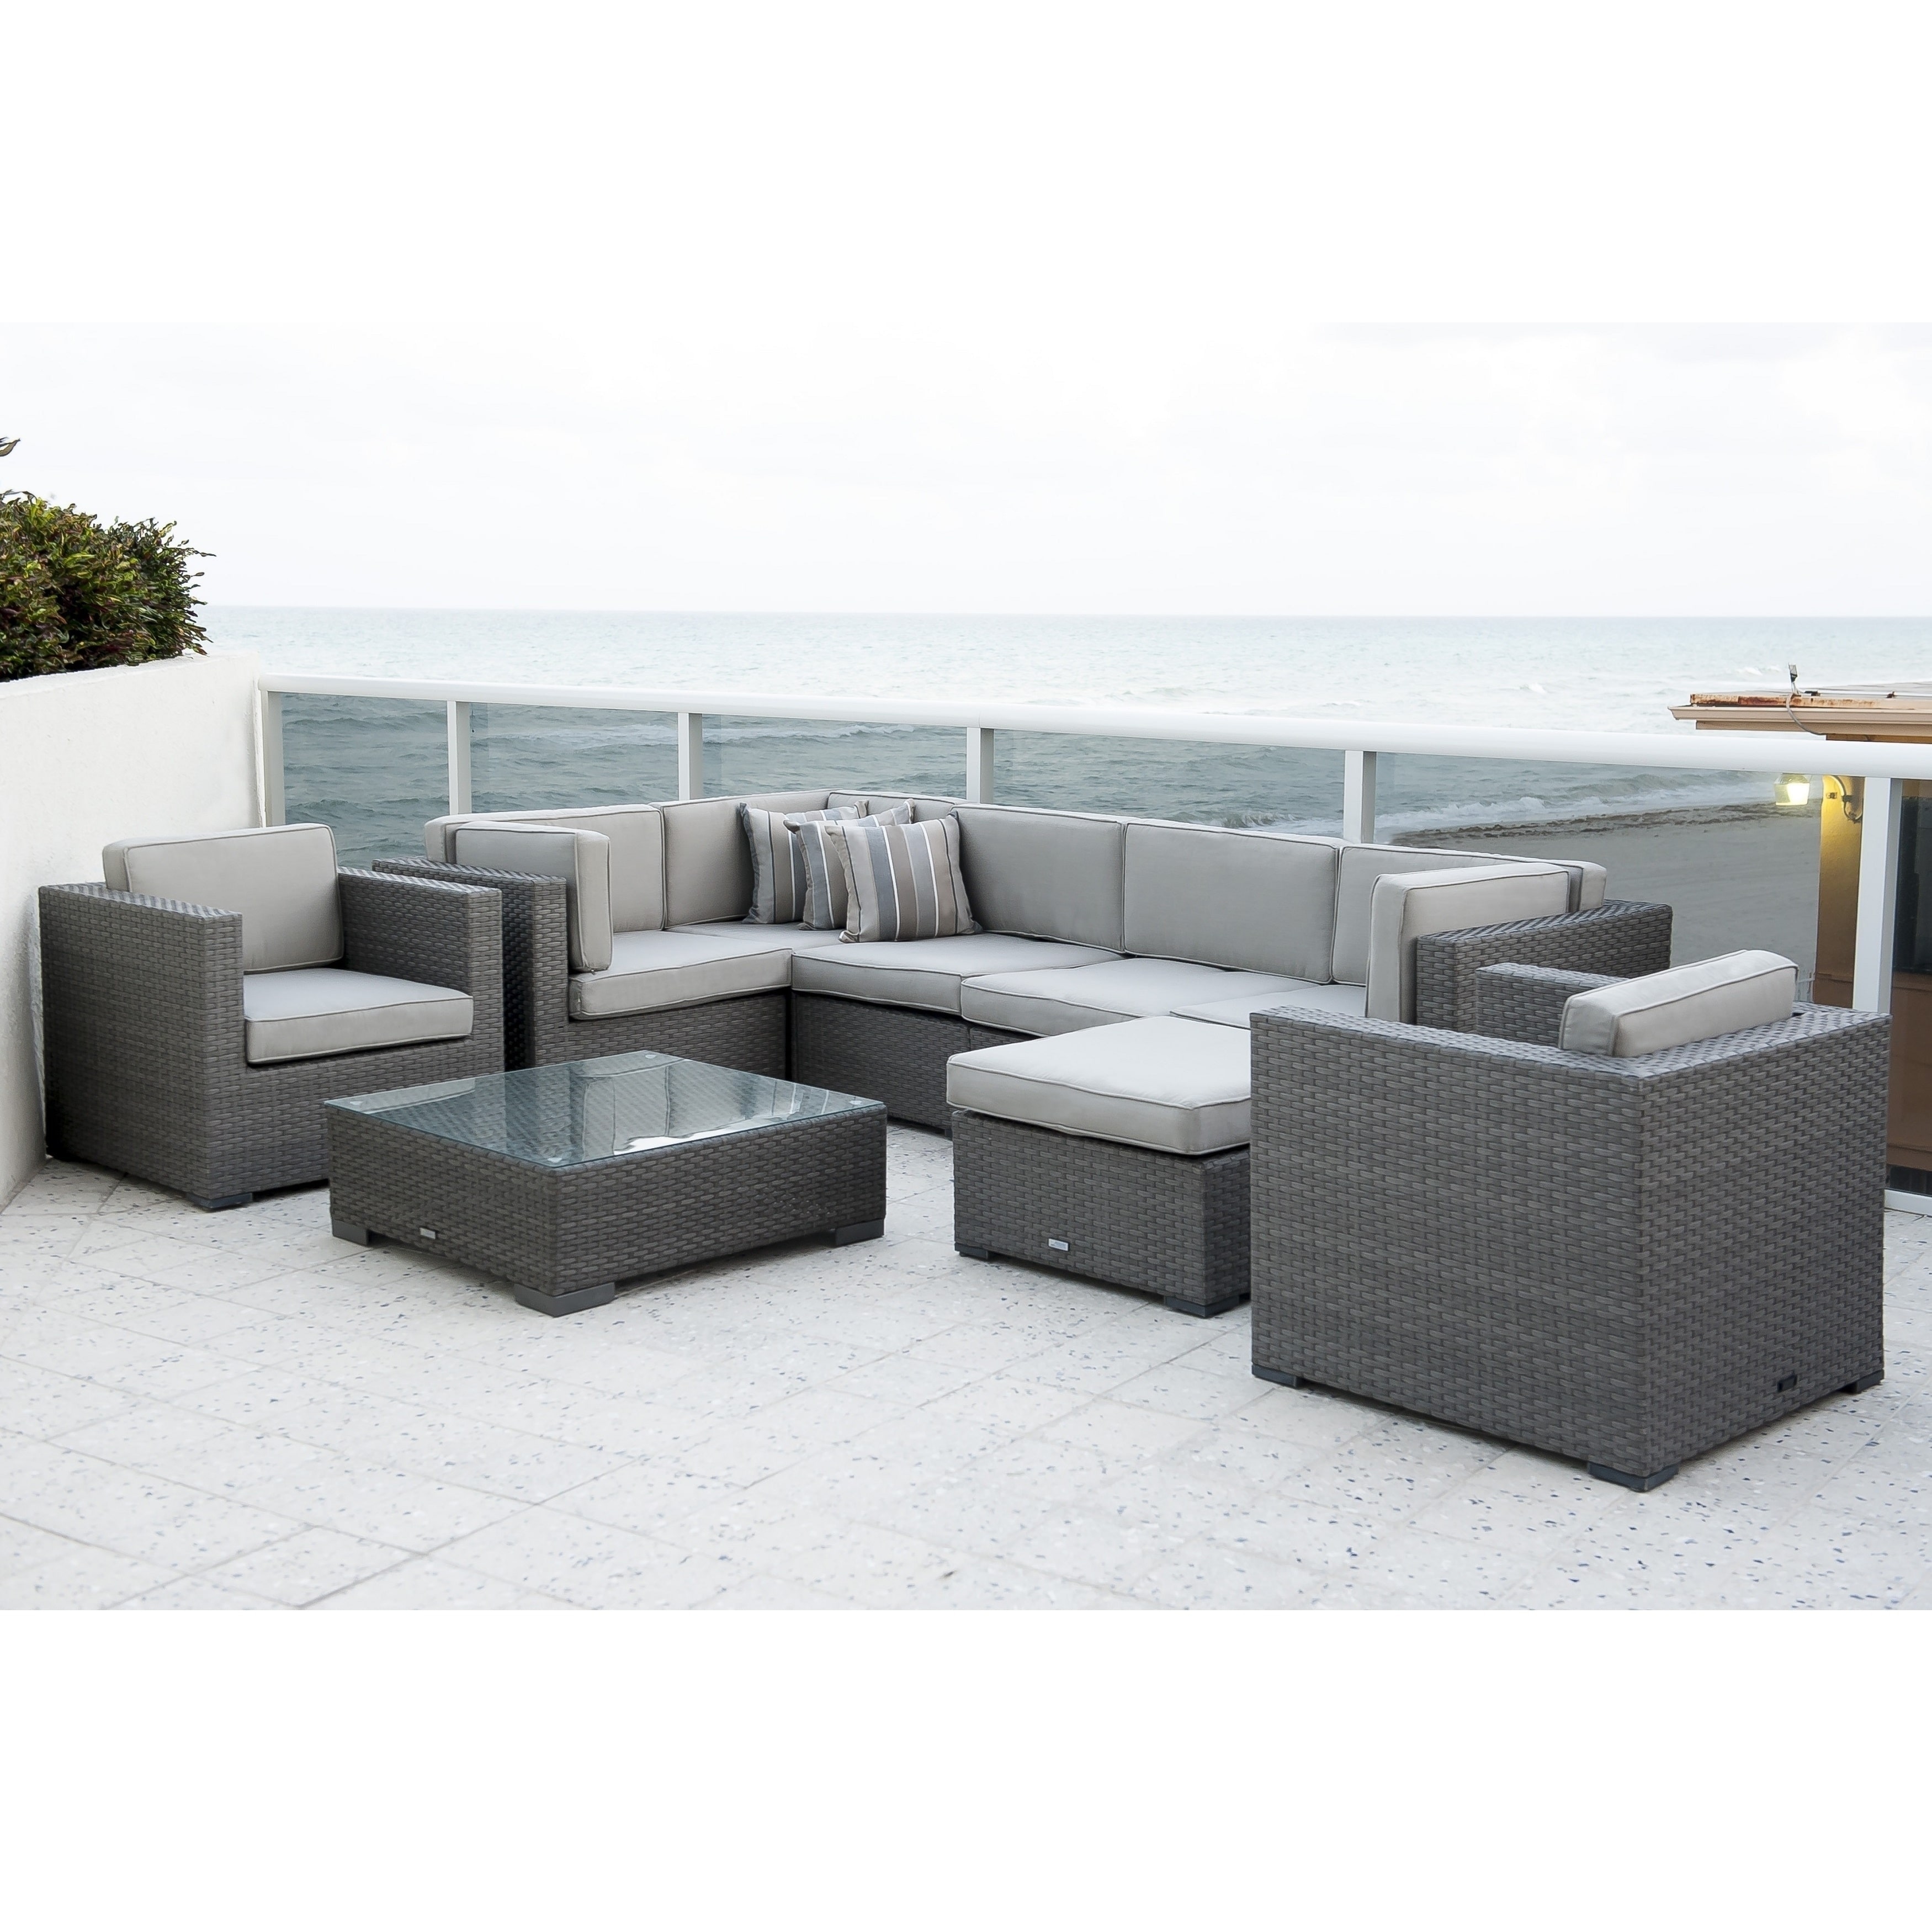 Shop Havenside Home Fort Lauderdale 9 Piece Sectional Set With